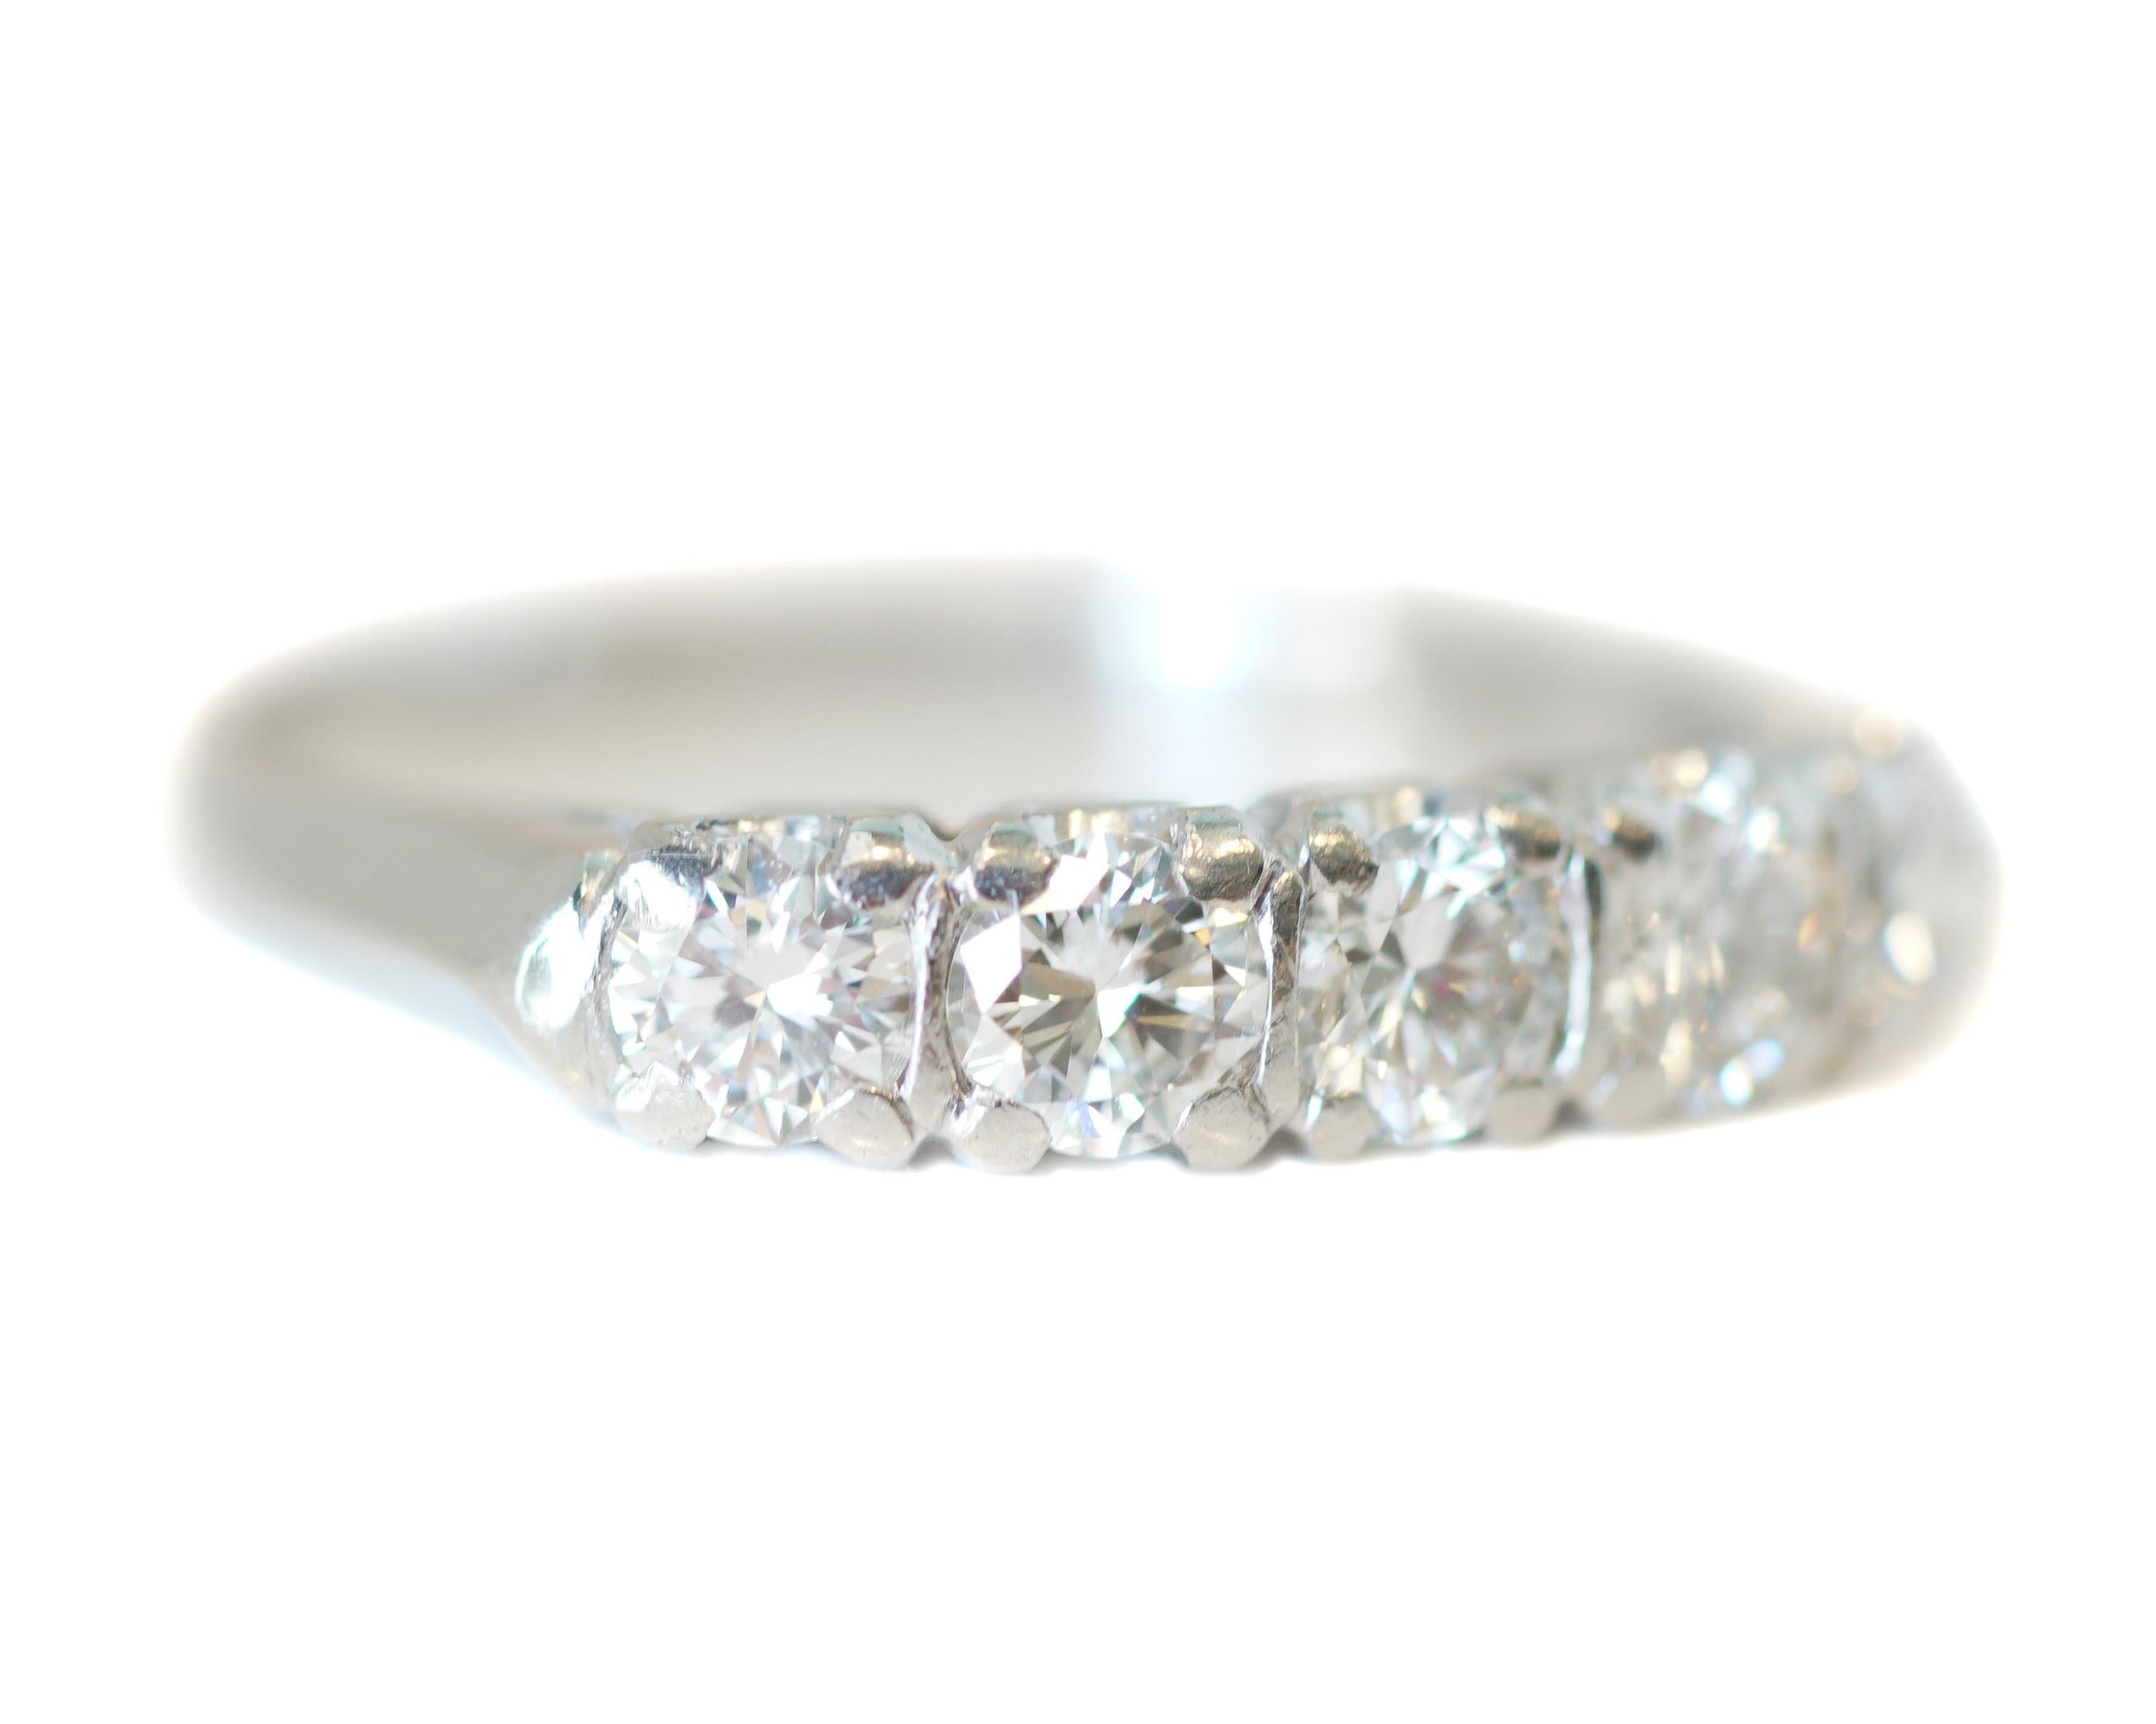 Item Description:
This band is sparkling with a total of 5 diamonds along the front frame. The transition cut diamonds total to 1.00 ct. The stones are embedded in bezel frames with the sides visible underneath the U-shaped prongs. The shiny frame